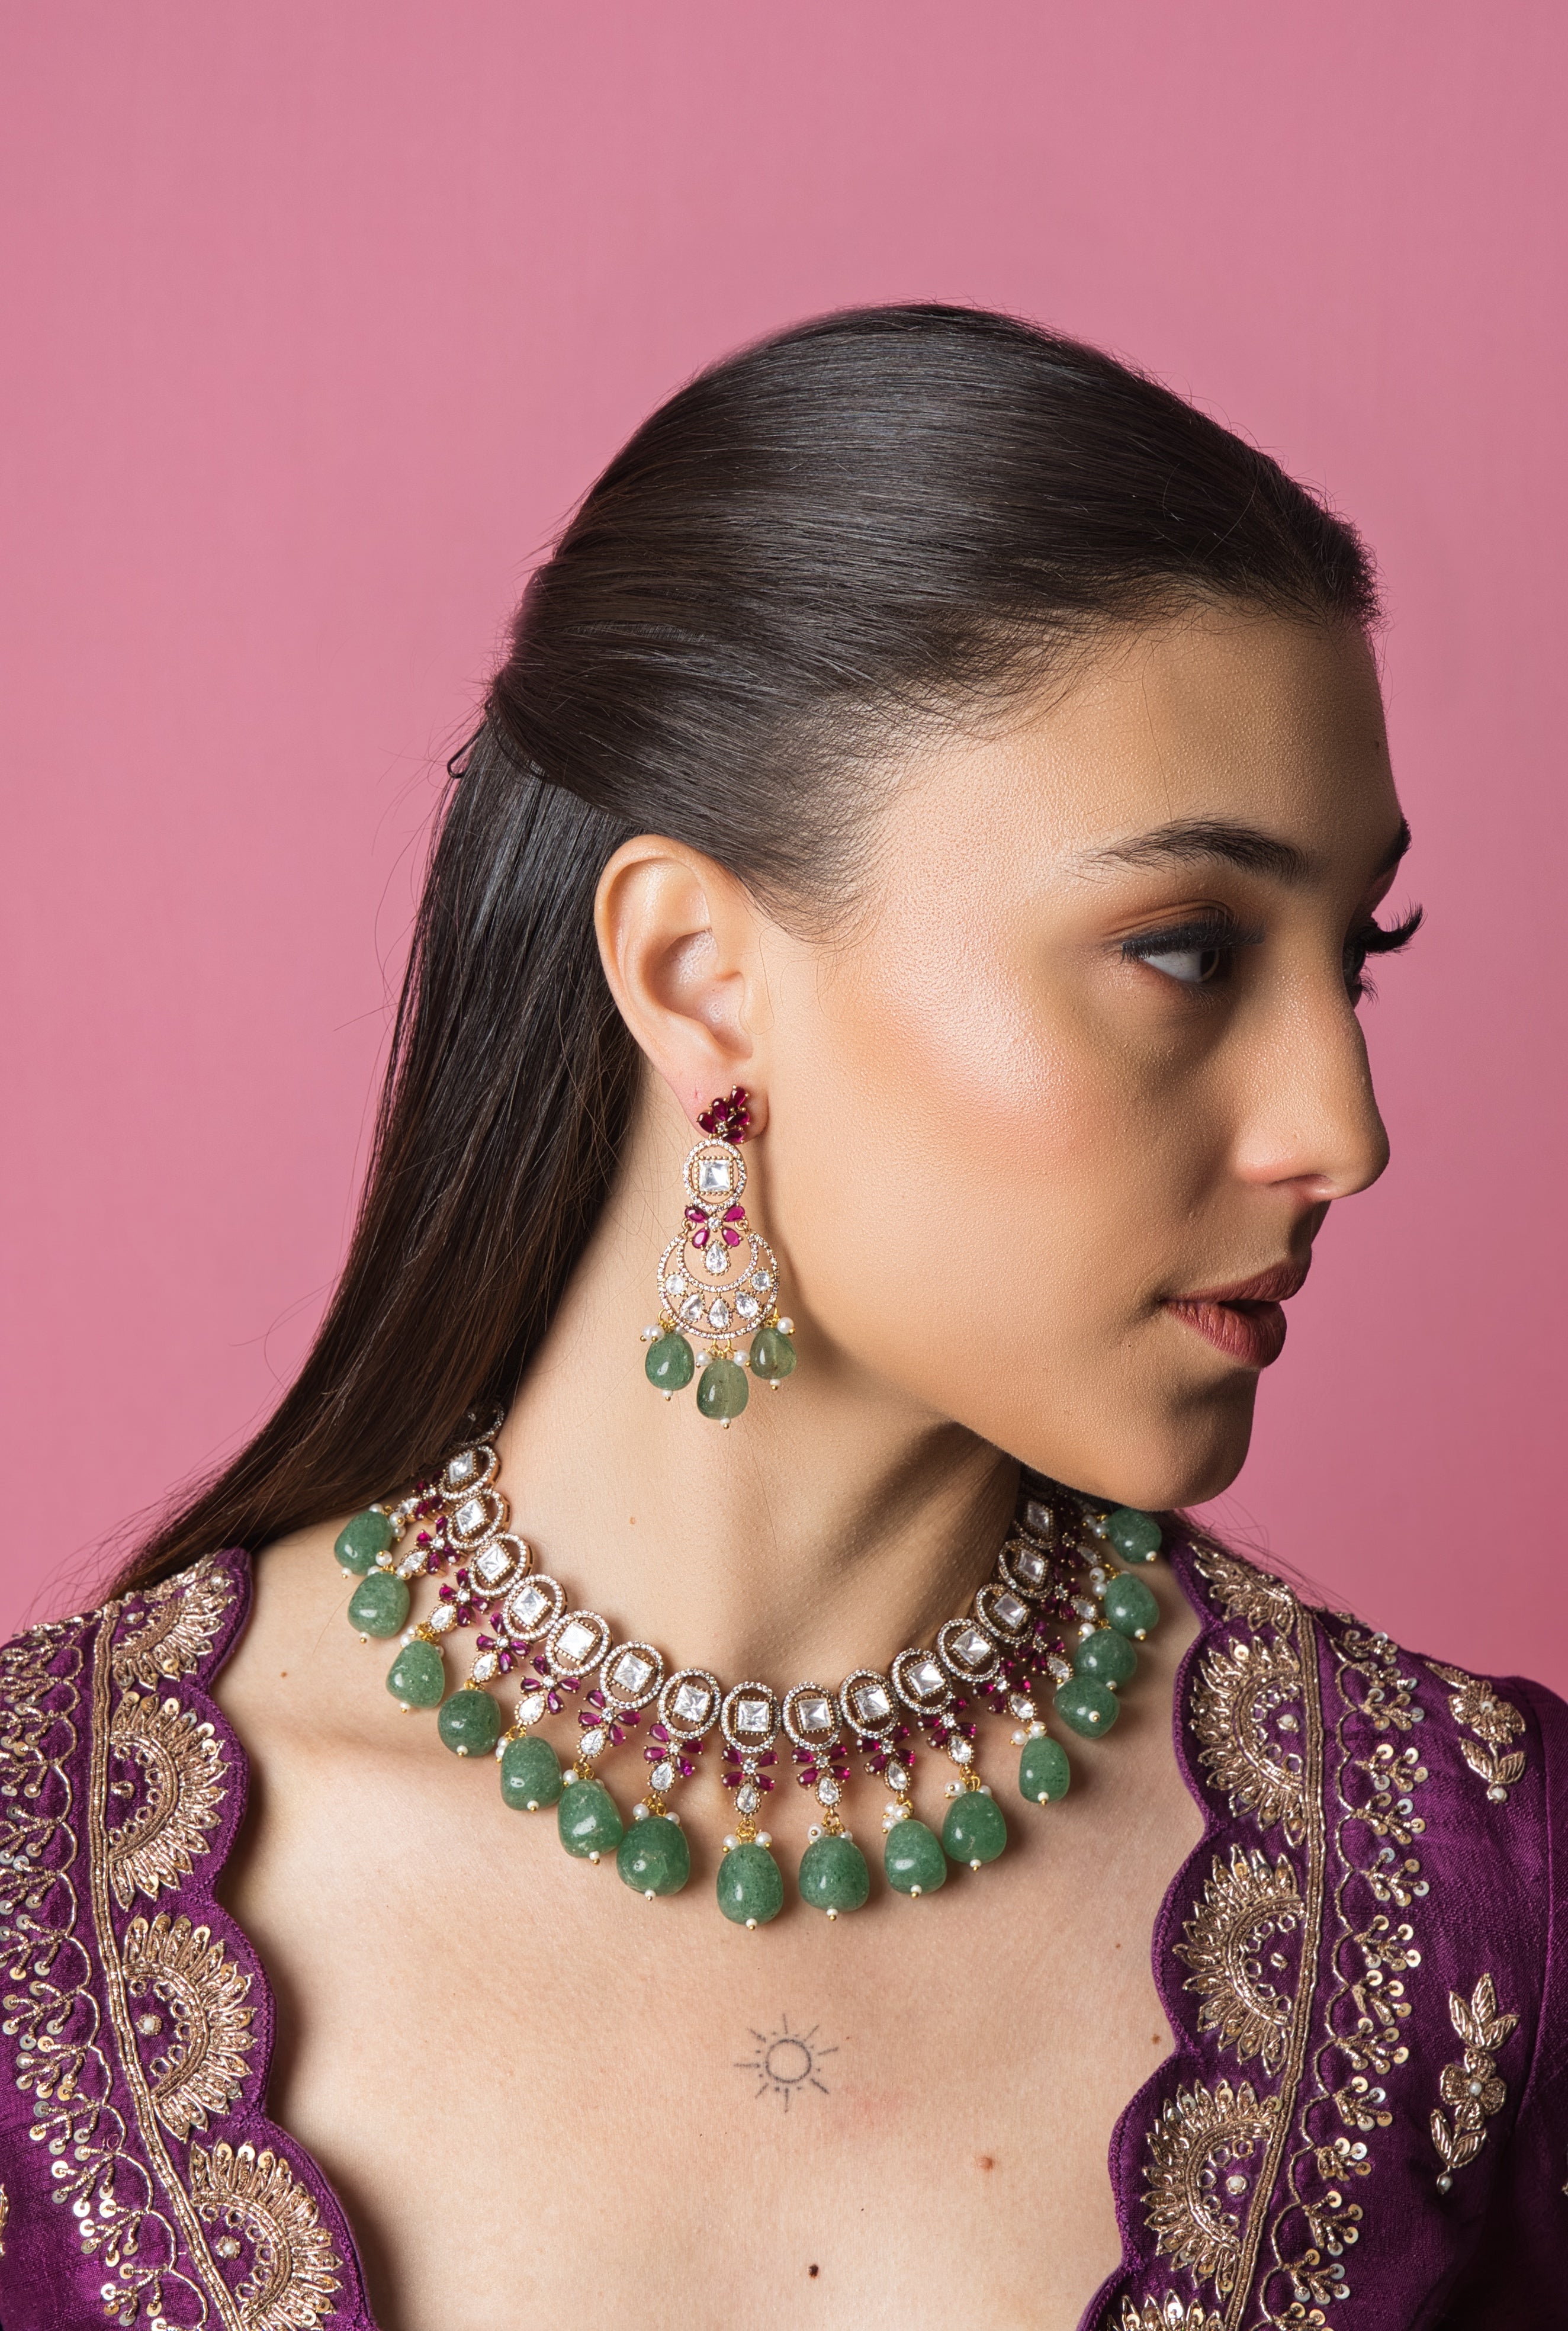 Elegant Necklace and Earring Set: Hand-crafted with personalized details, our artisanal jewelry elevates your style with unique and artistic designs.